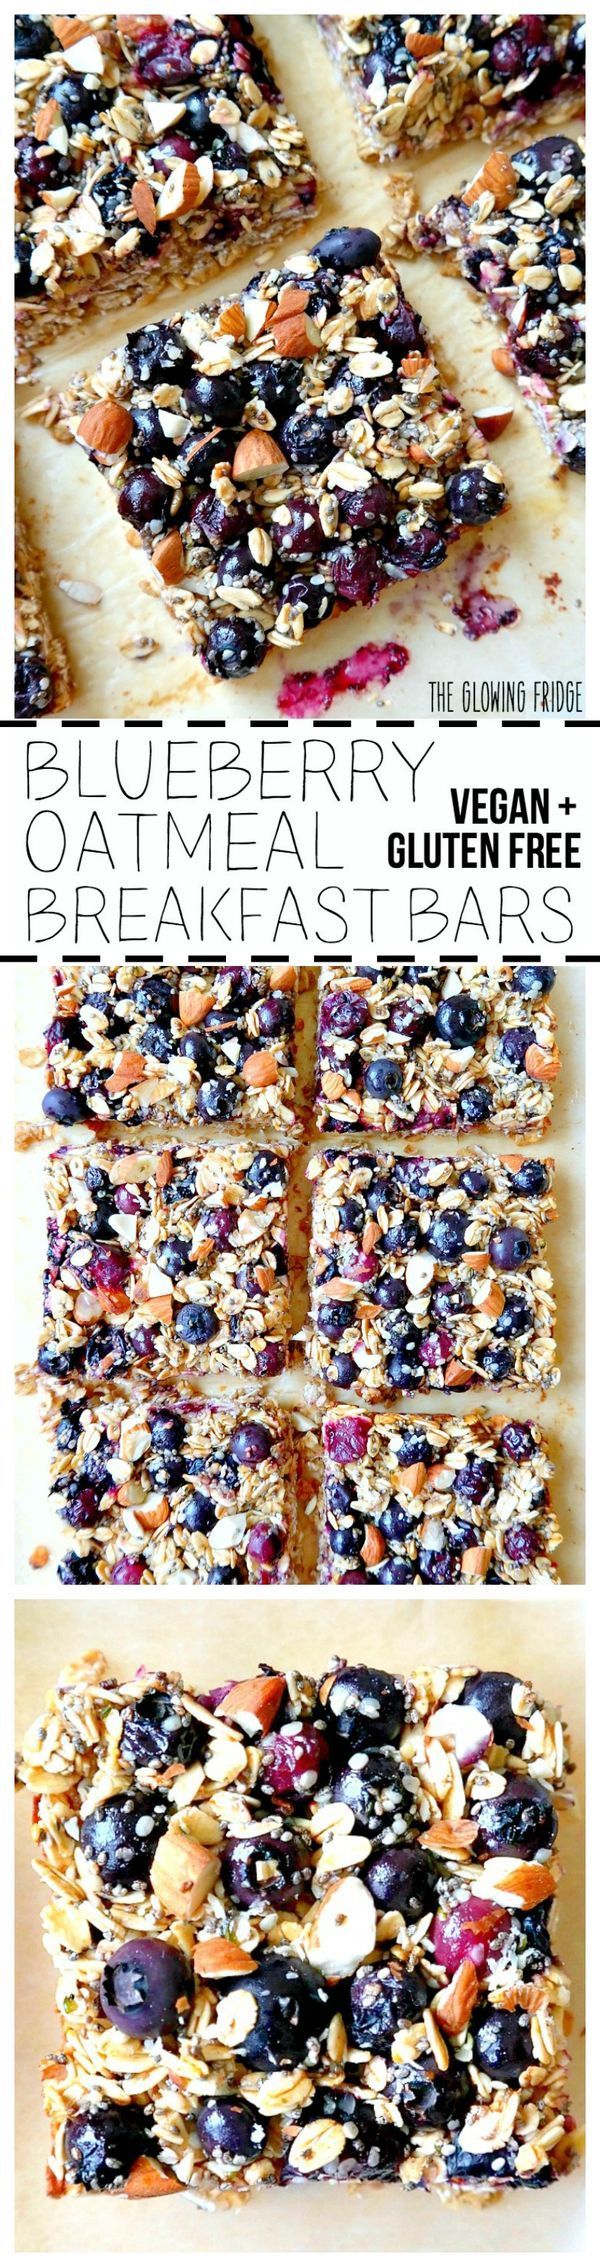 VEGAN Blueberry Oatmeal Breakfast Bars that are wholesome, super clean, nutritiona